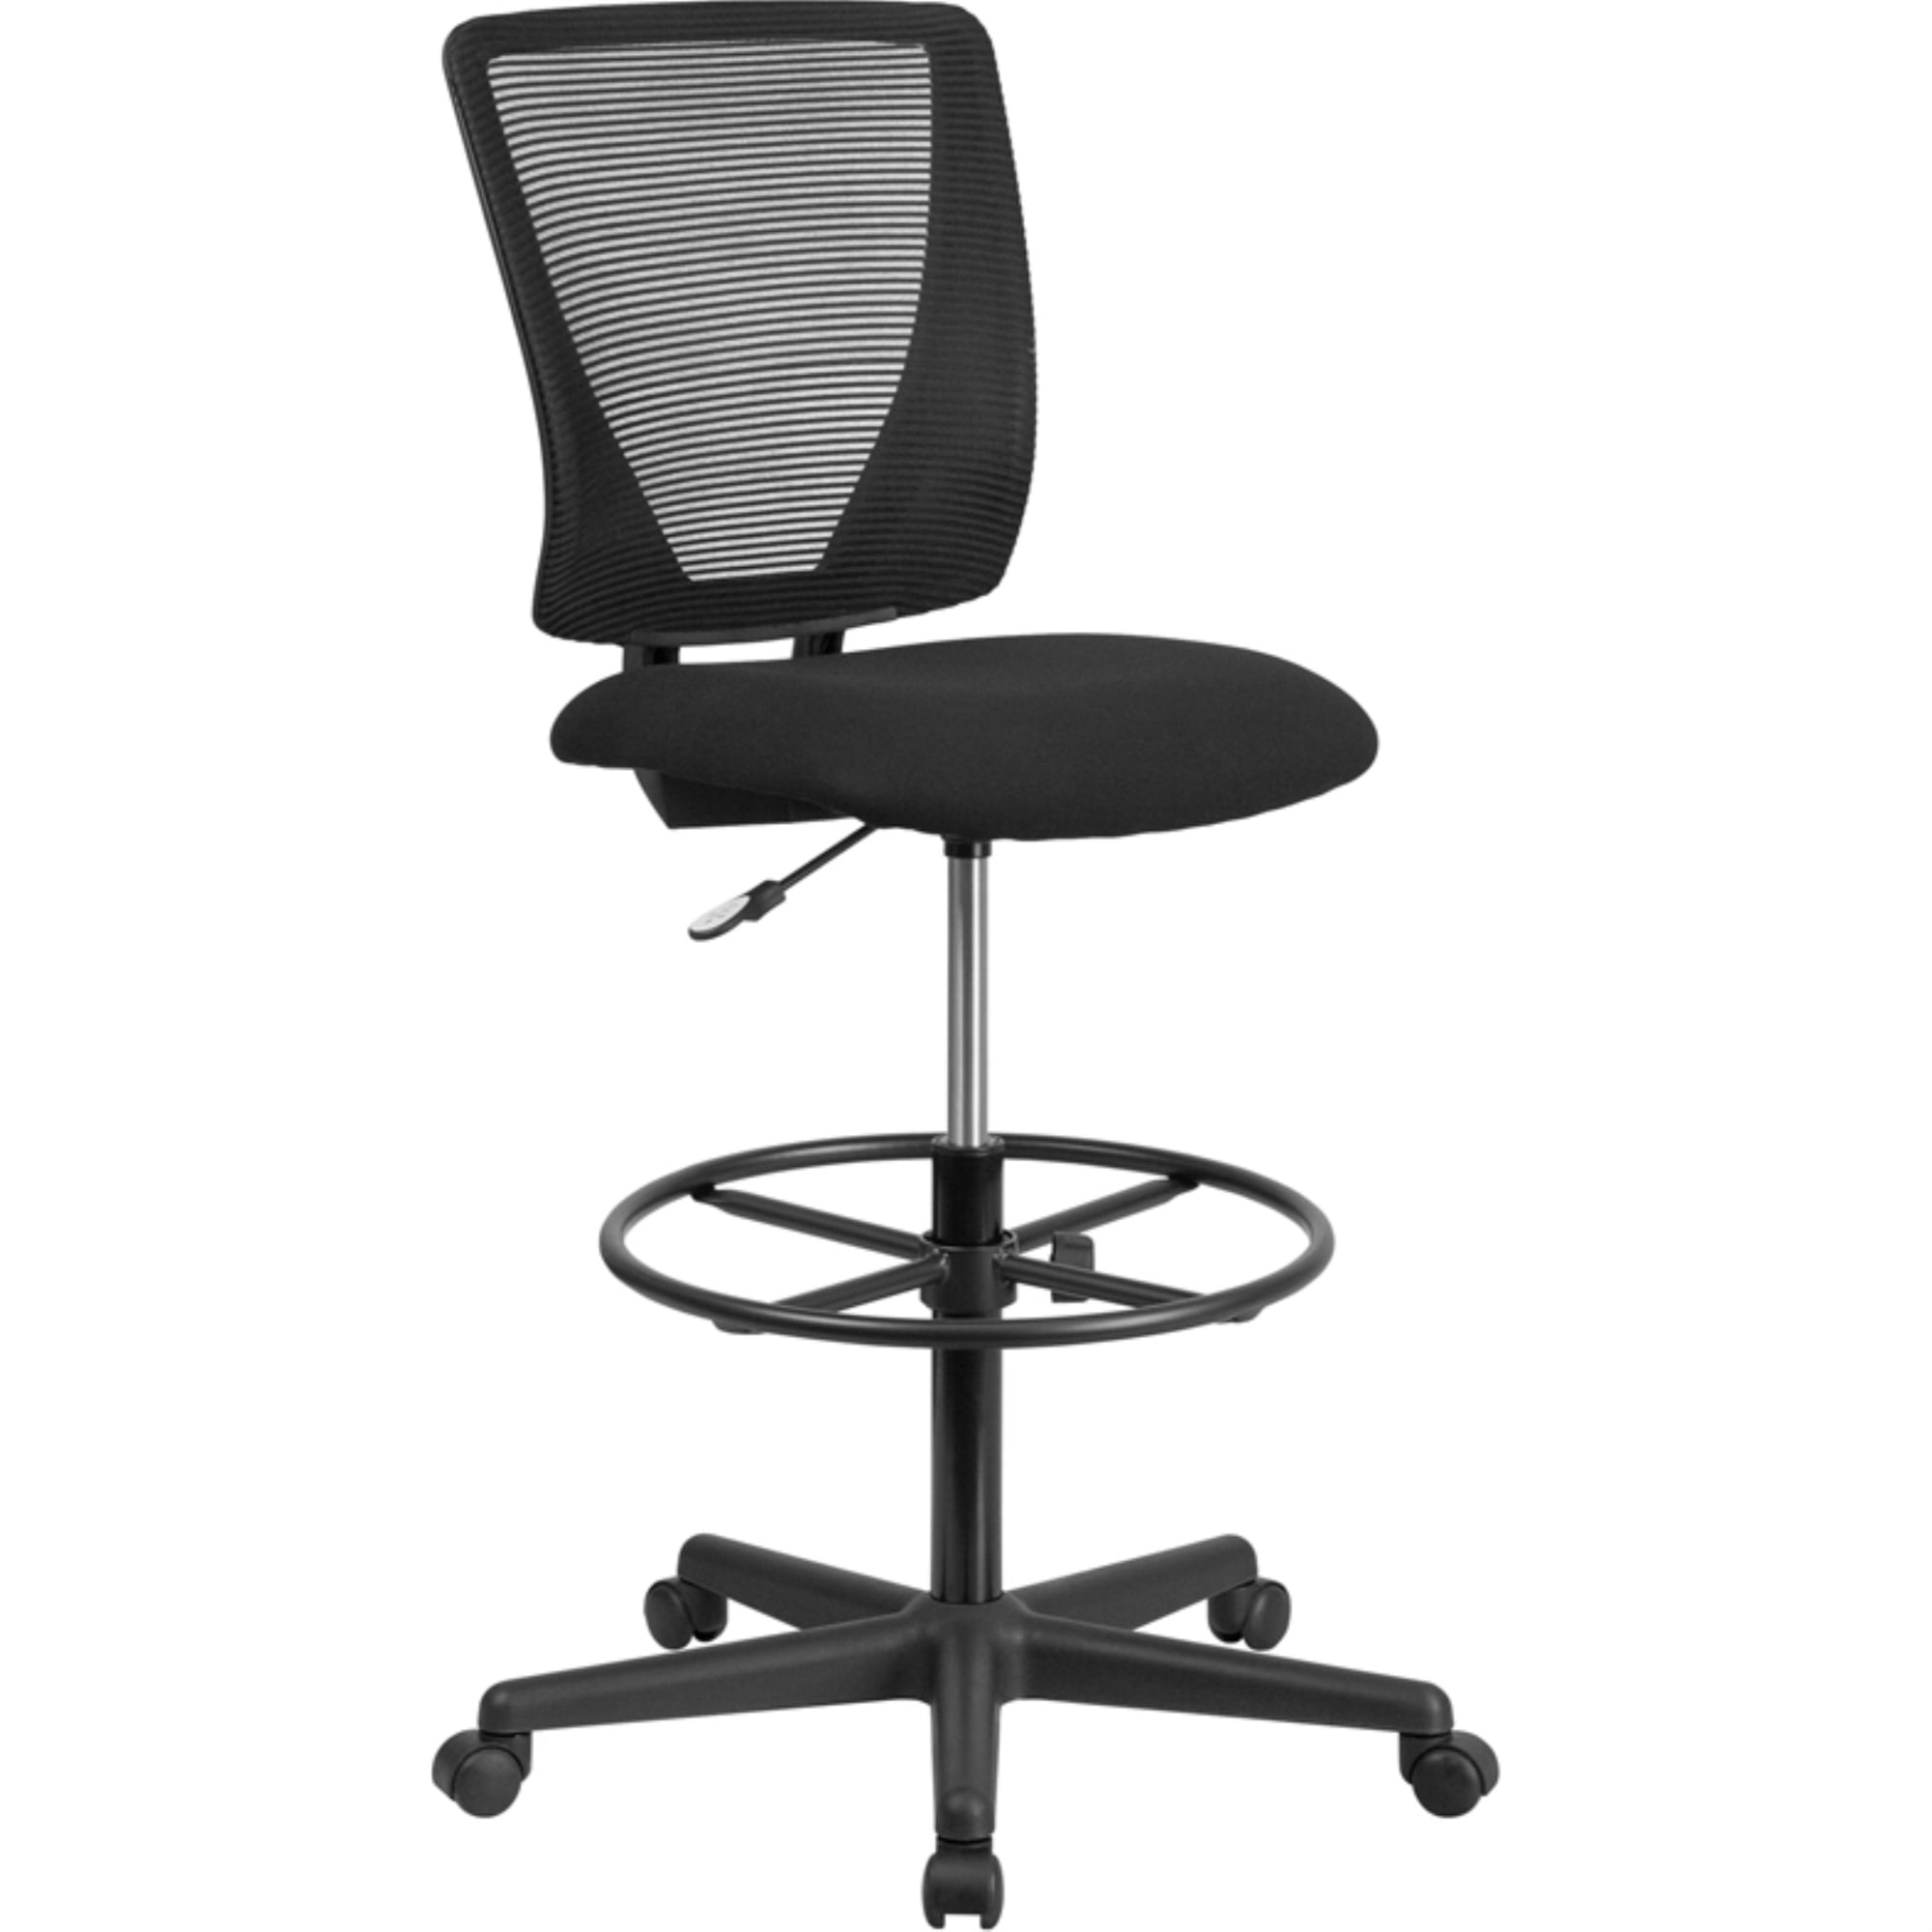 Black Office Star Deluxe Ergonomic Seat and Back Pneumatic Drafting Chair with Lumbar Support and Adjustable Chromed Footring